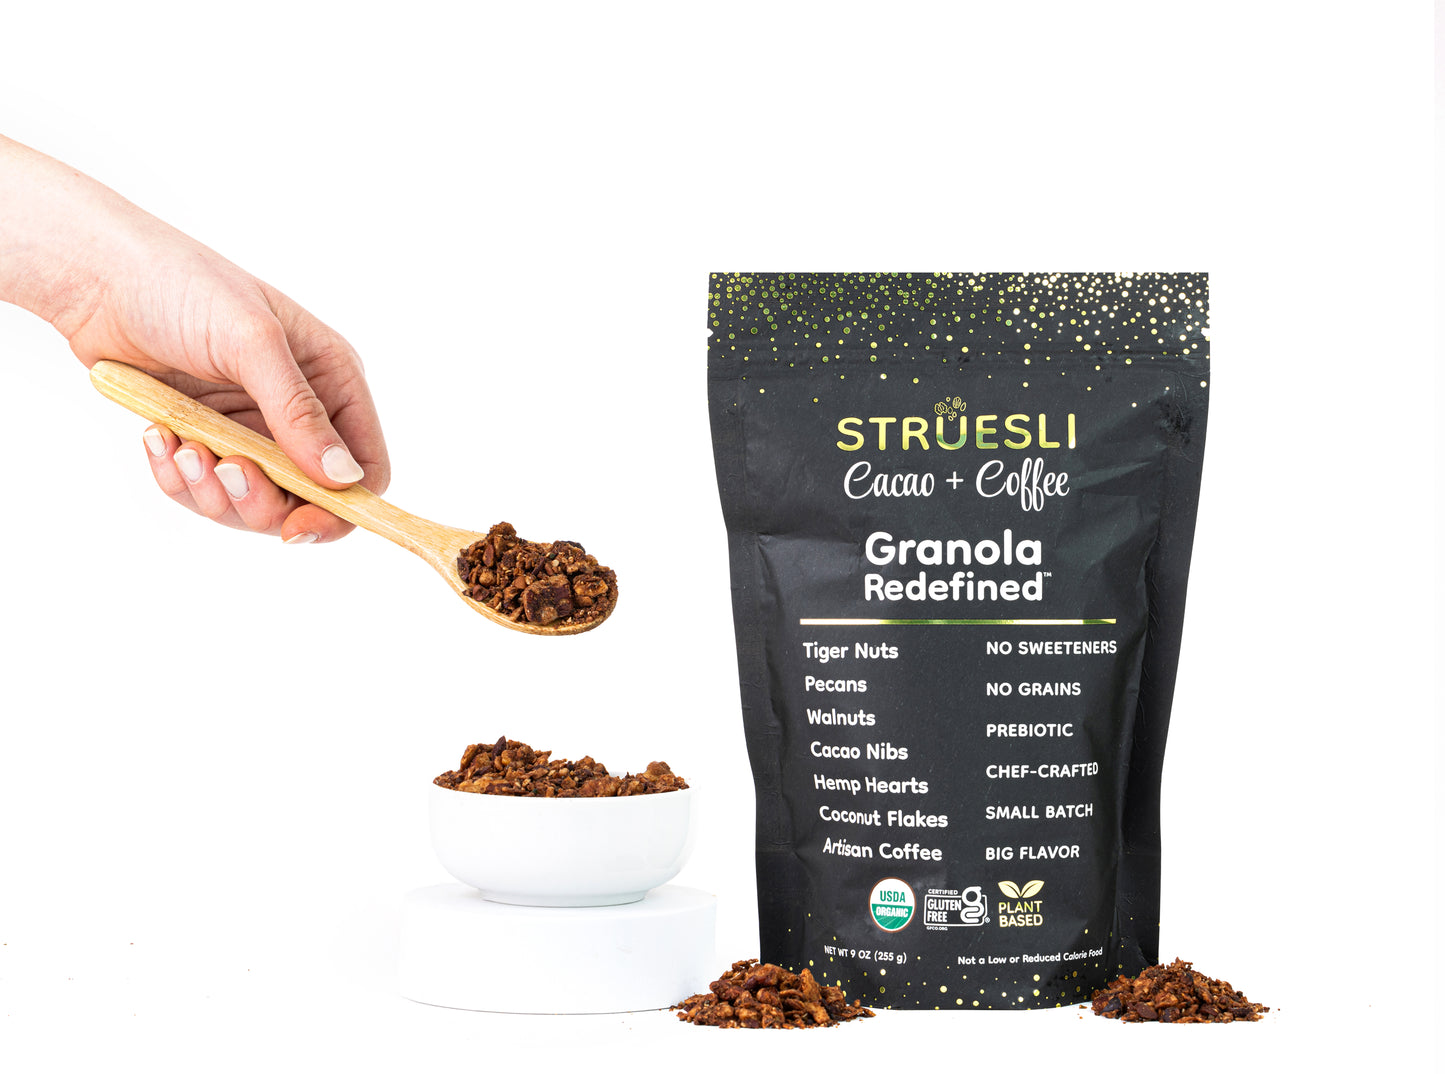 A package of Struesli Cacao + Coffee granola next to a bowl and spoonful of granola